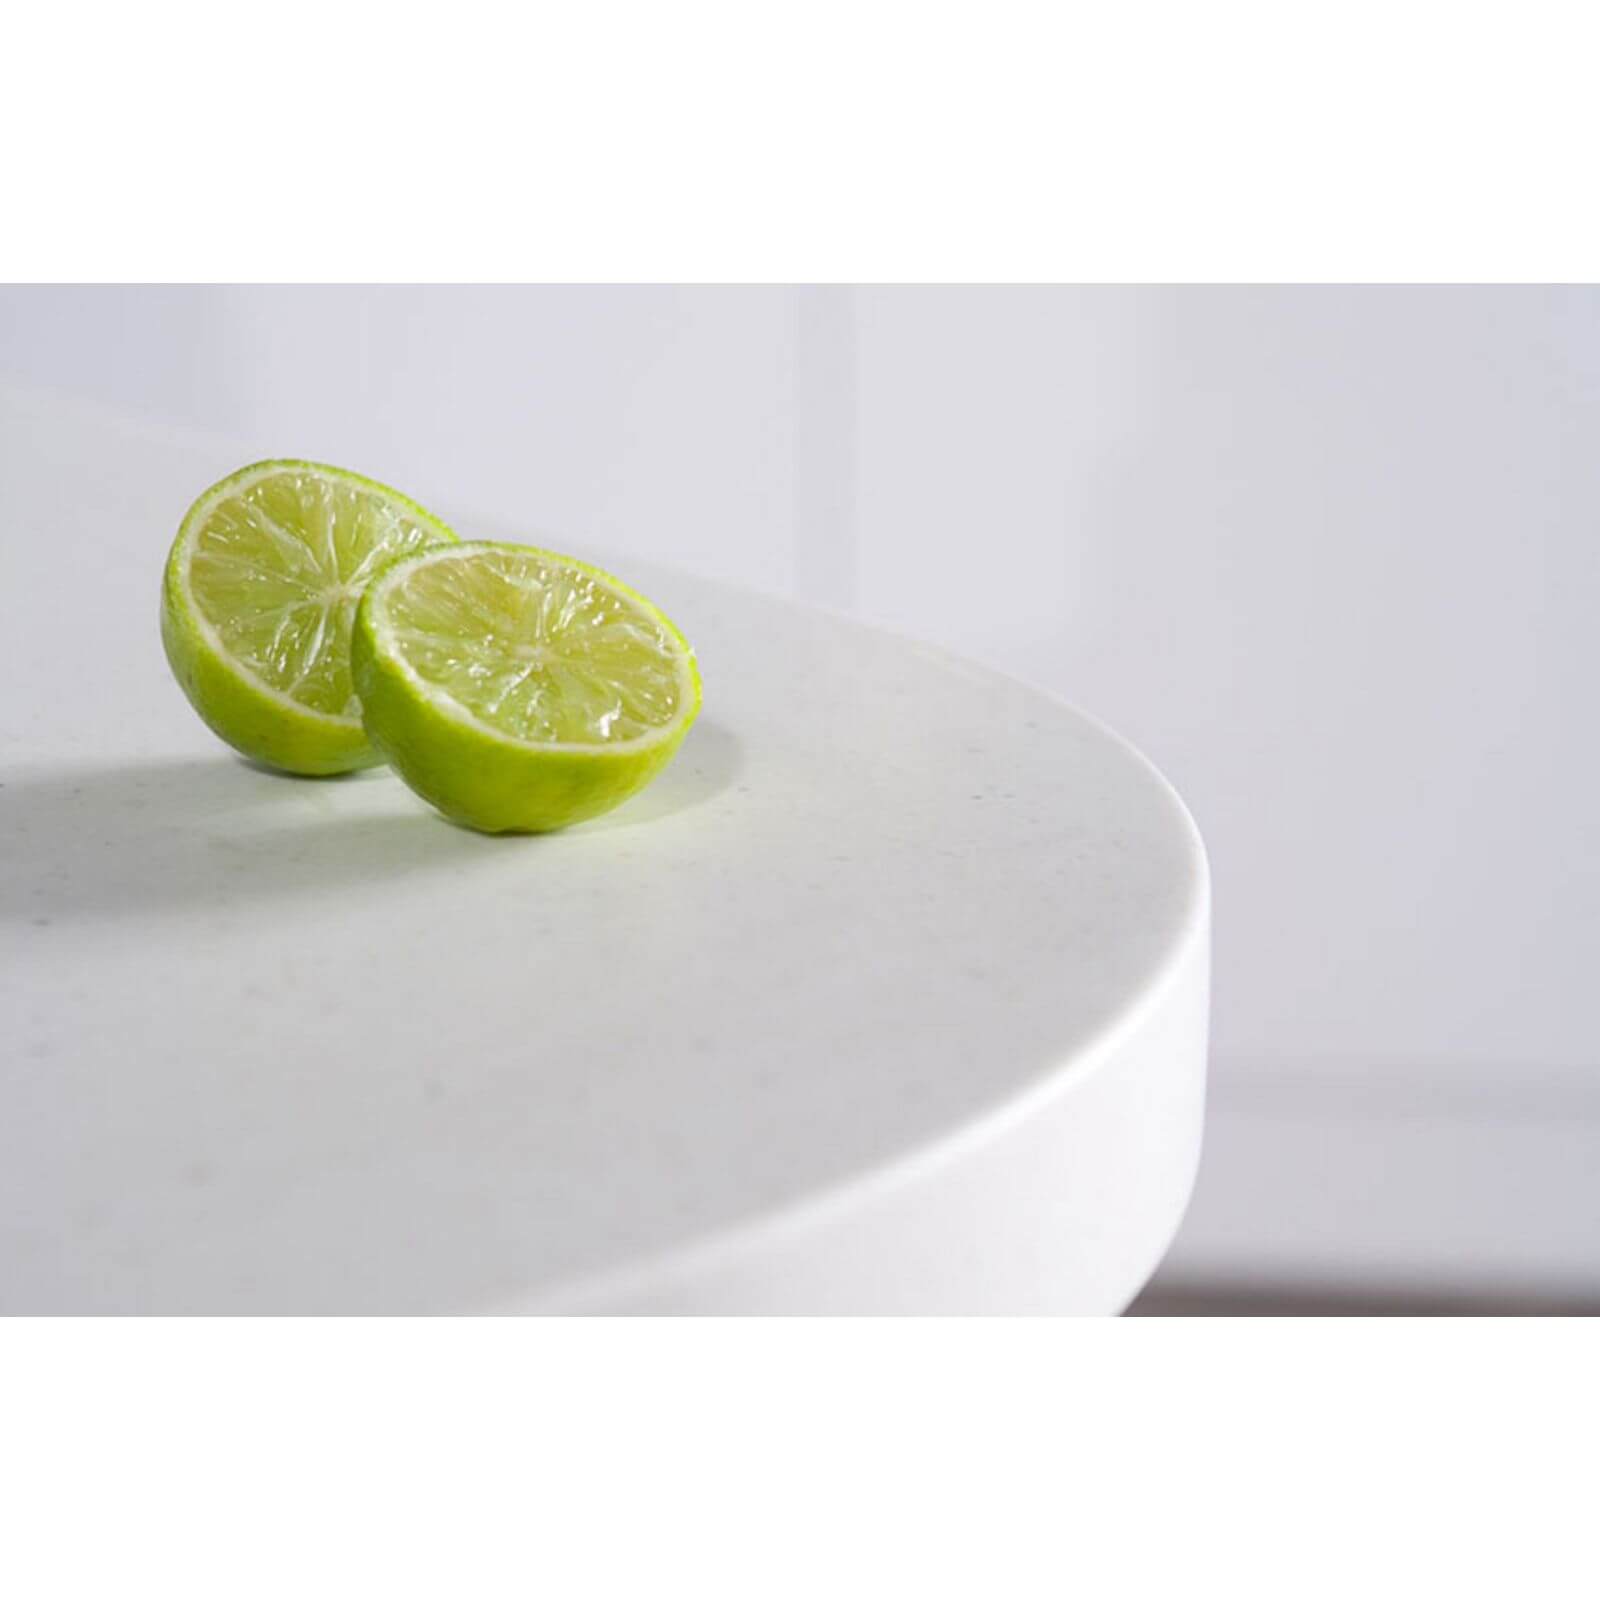 Maia Calcite Kitchen Sink Worktop - Acrylic 1.5 Duo Right Hand Bowl - 1800 x 650 x 28mm